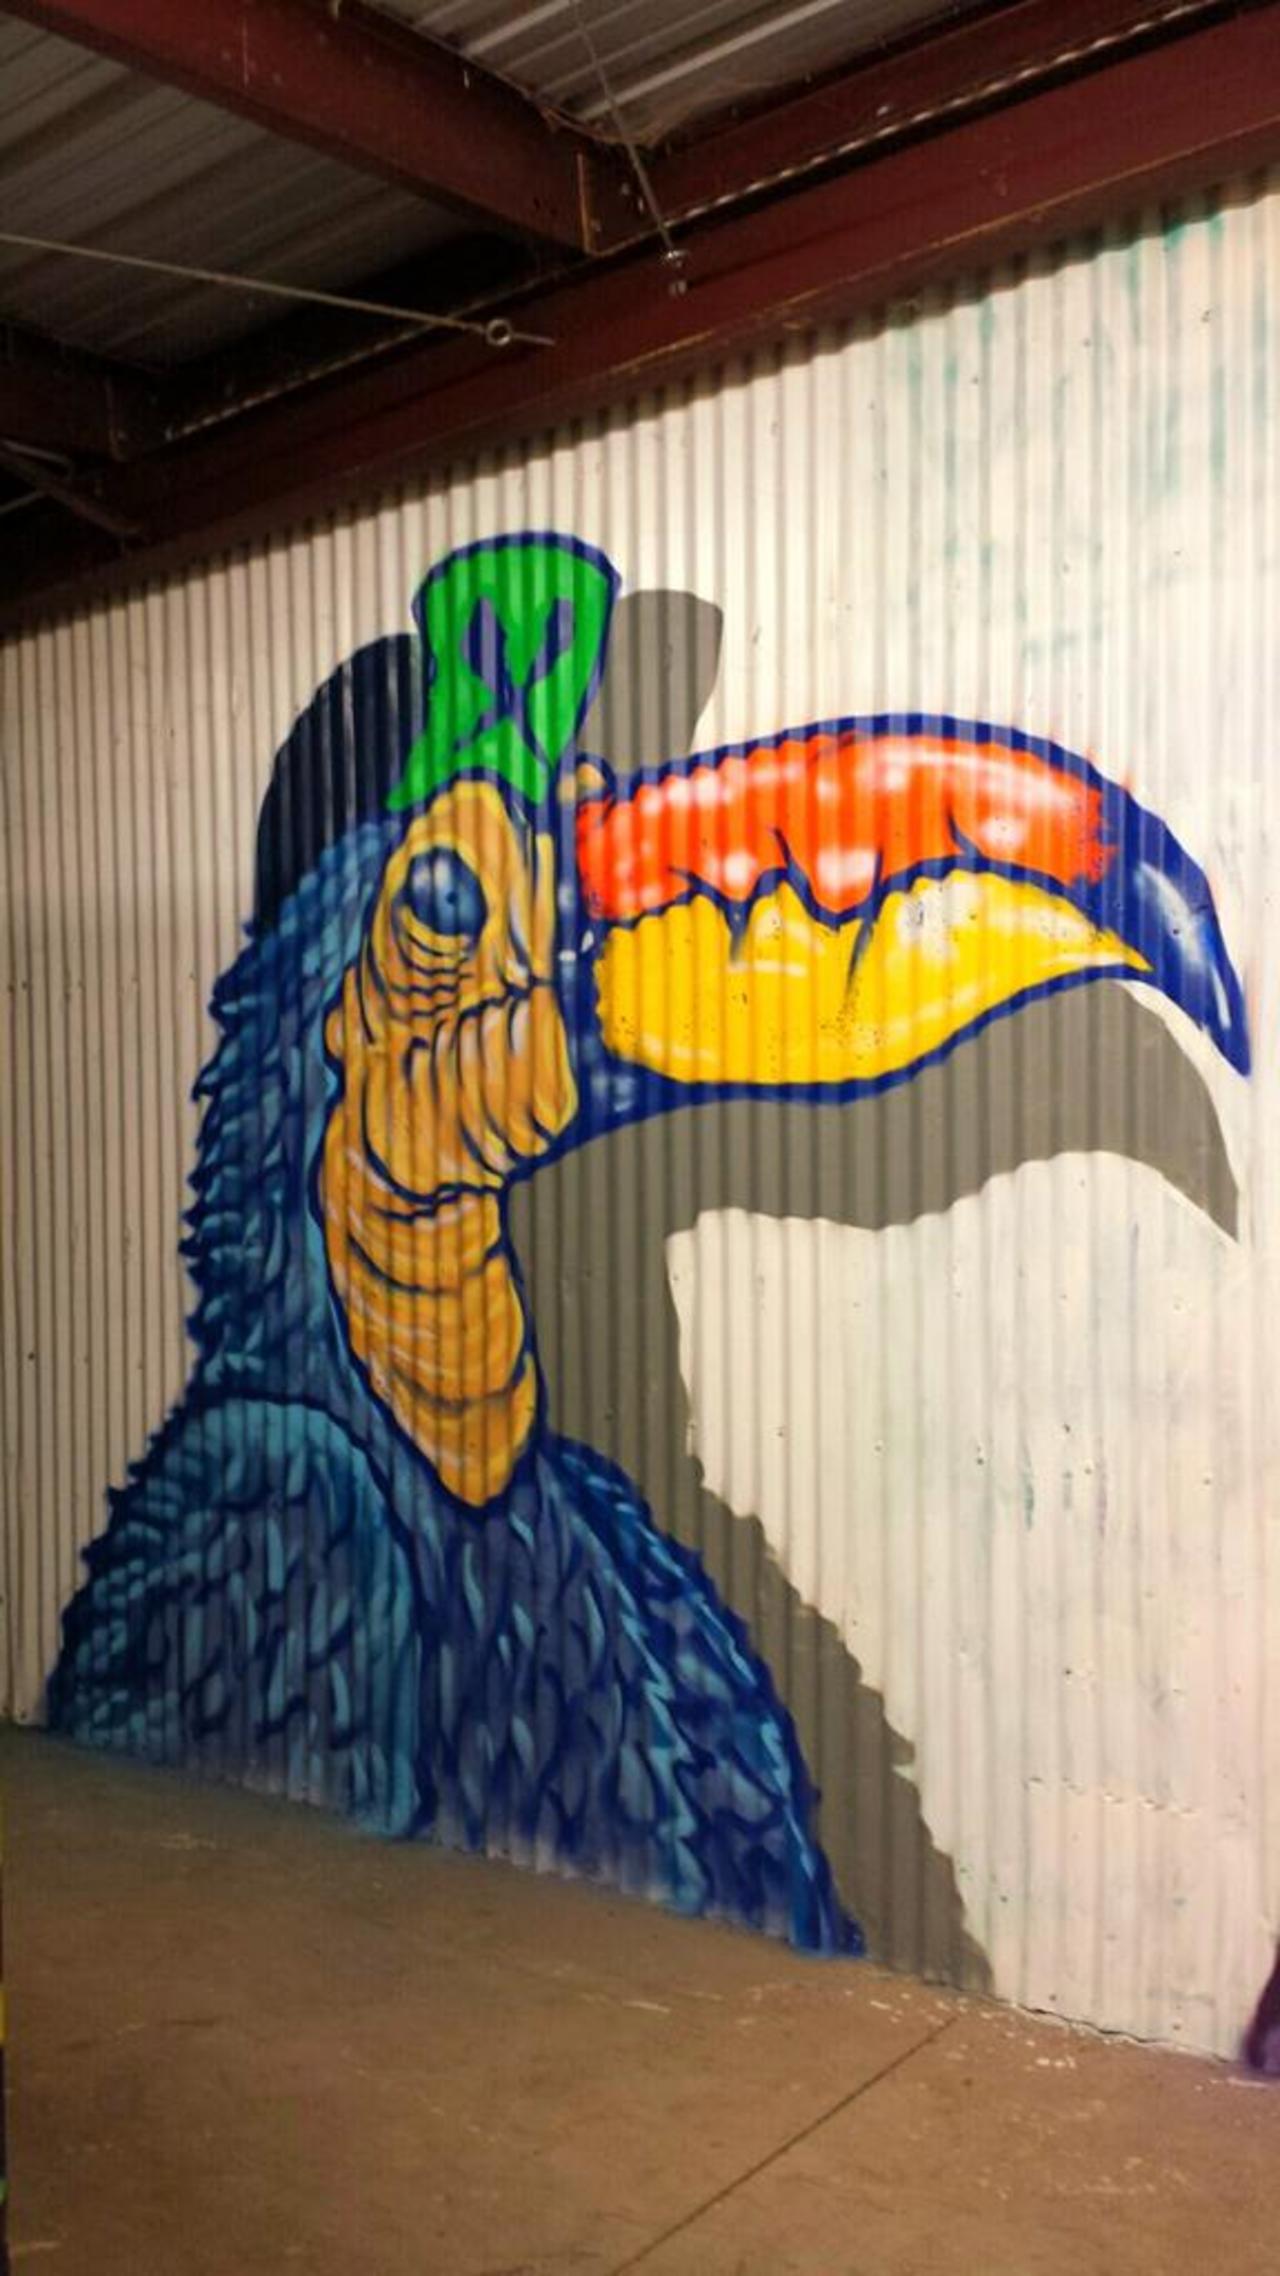 "2CAN" #toucan #bird #mural #graffiti #character #characters #spraypaintonly #fruitloops #spraypaintonly http://t.co/NKYrJIhv2A